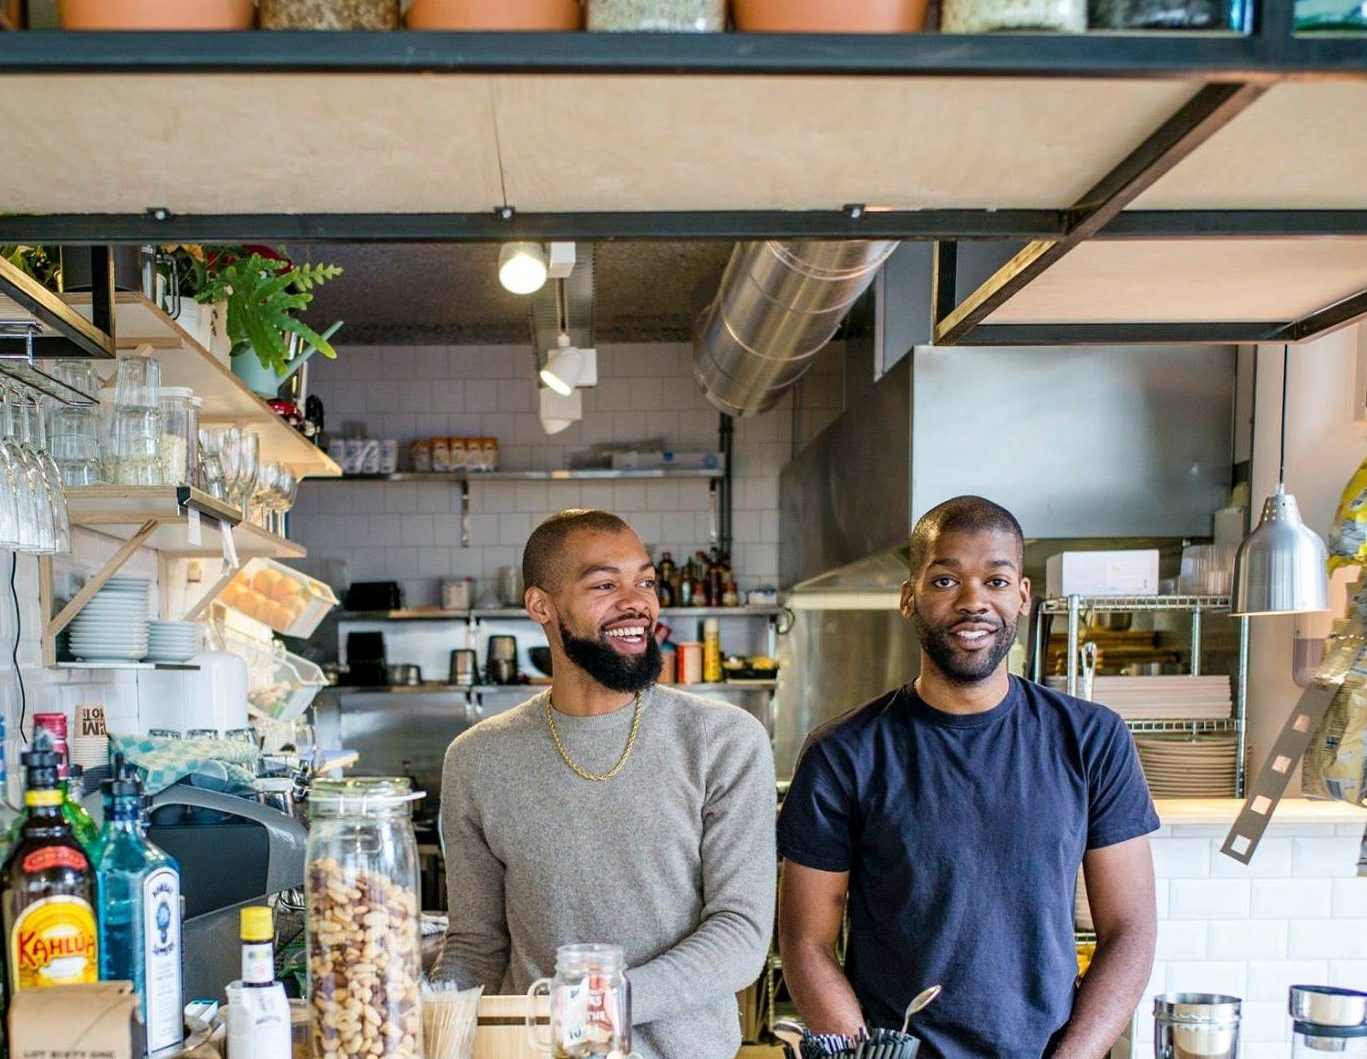 How To Spend A Day In Black-Owned Amsterdam